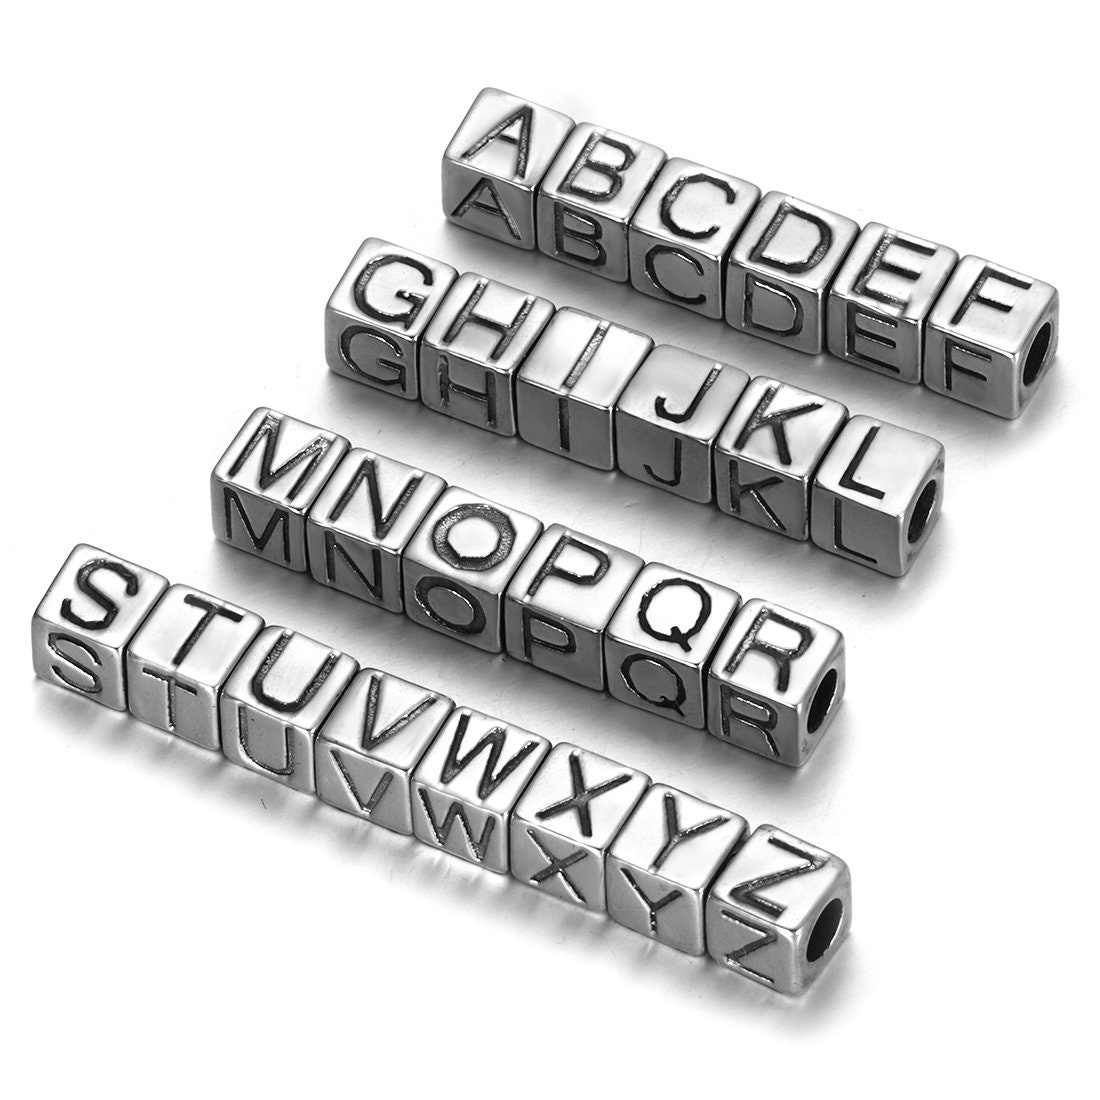 Buy Paracord alphabet letter beads White J at 123Paracord - 123Paracord